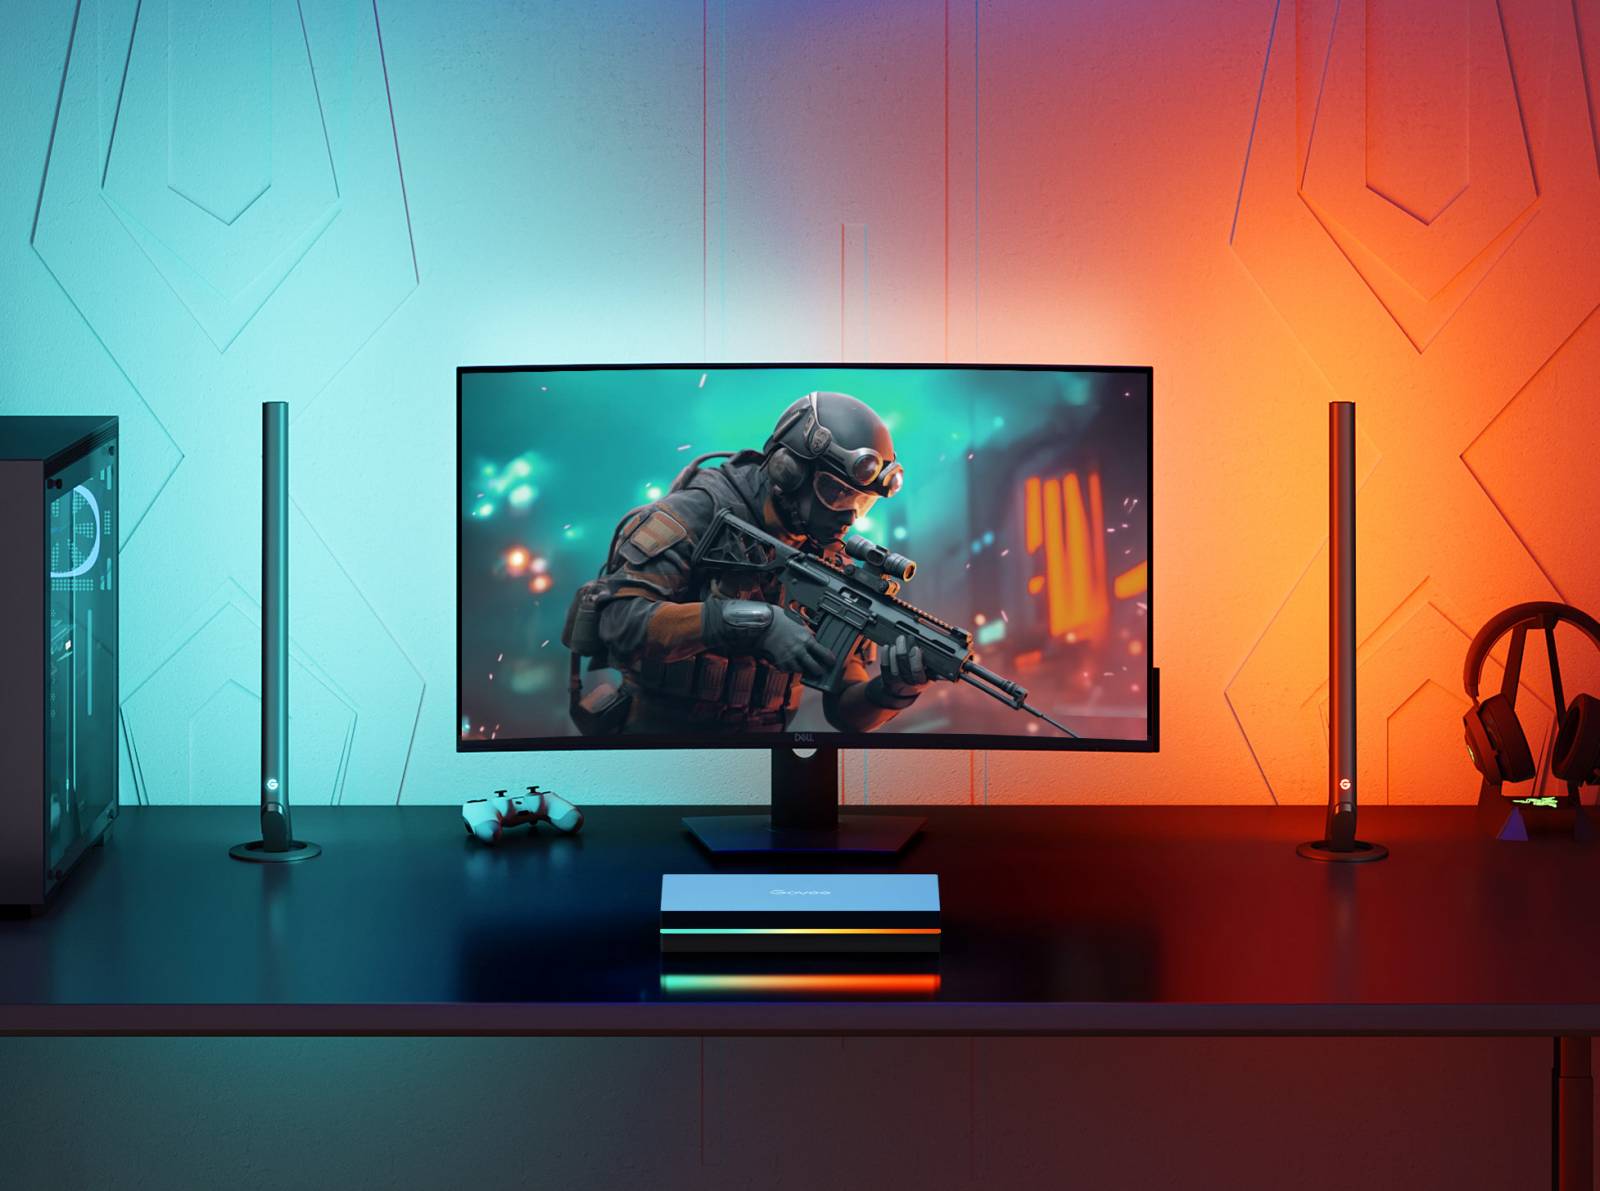 Govee AI Sync Box Kit 2 and Neon Rope Light 2 Will Transform Your Lighting In Gaming and Other Living Spaces